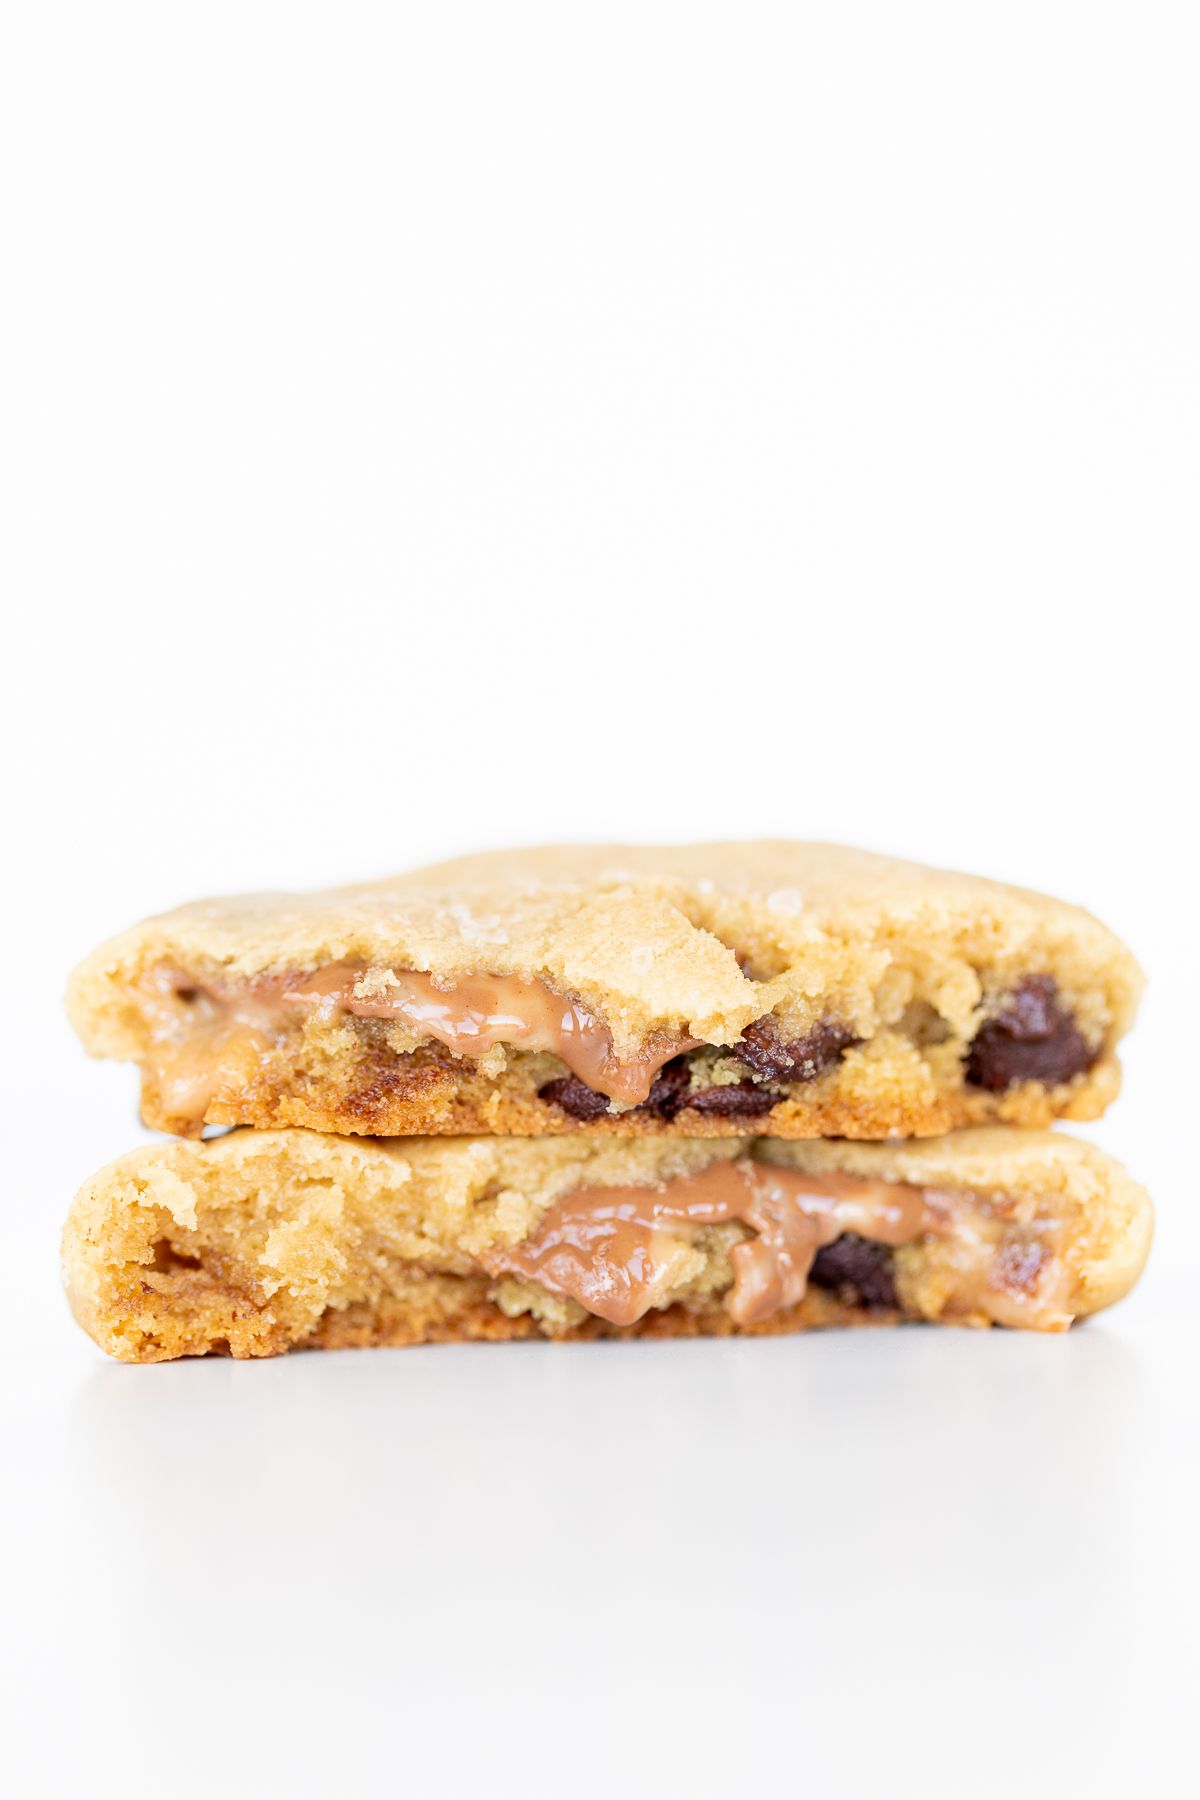 A salted caramel chocolate chip cookie, broken into two pieces.